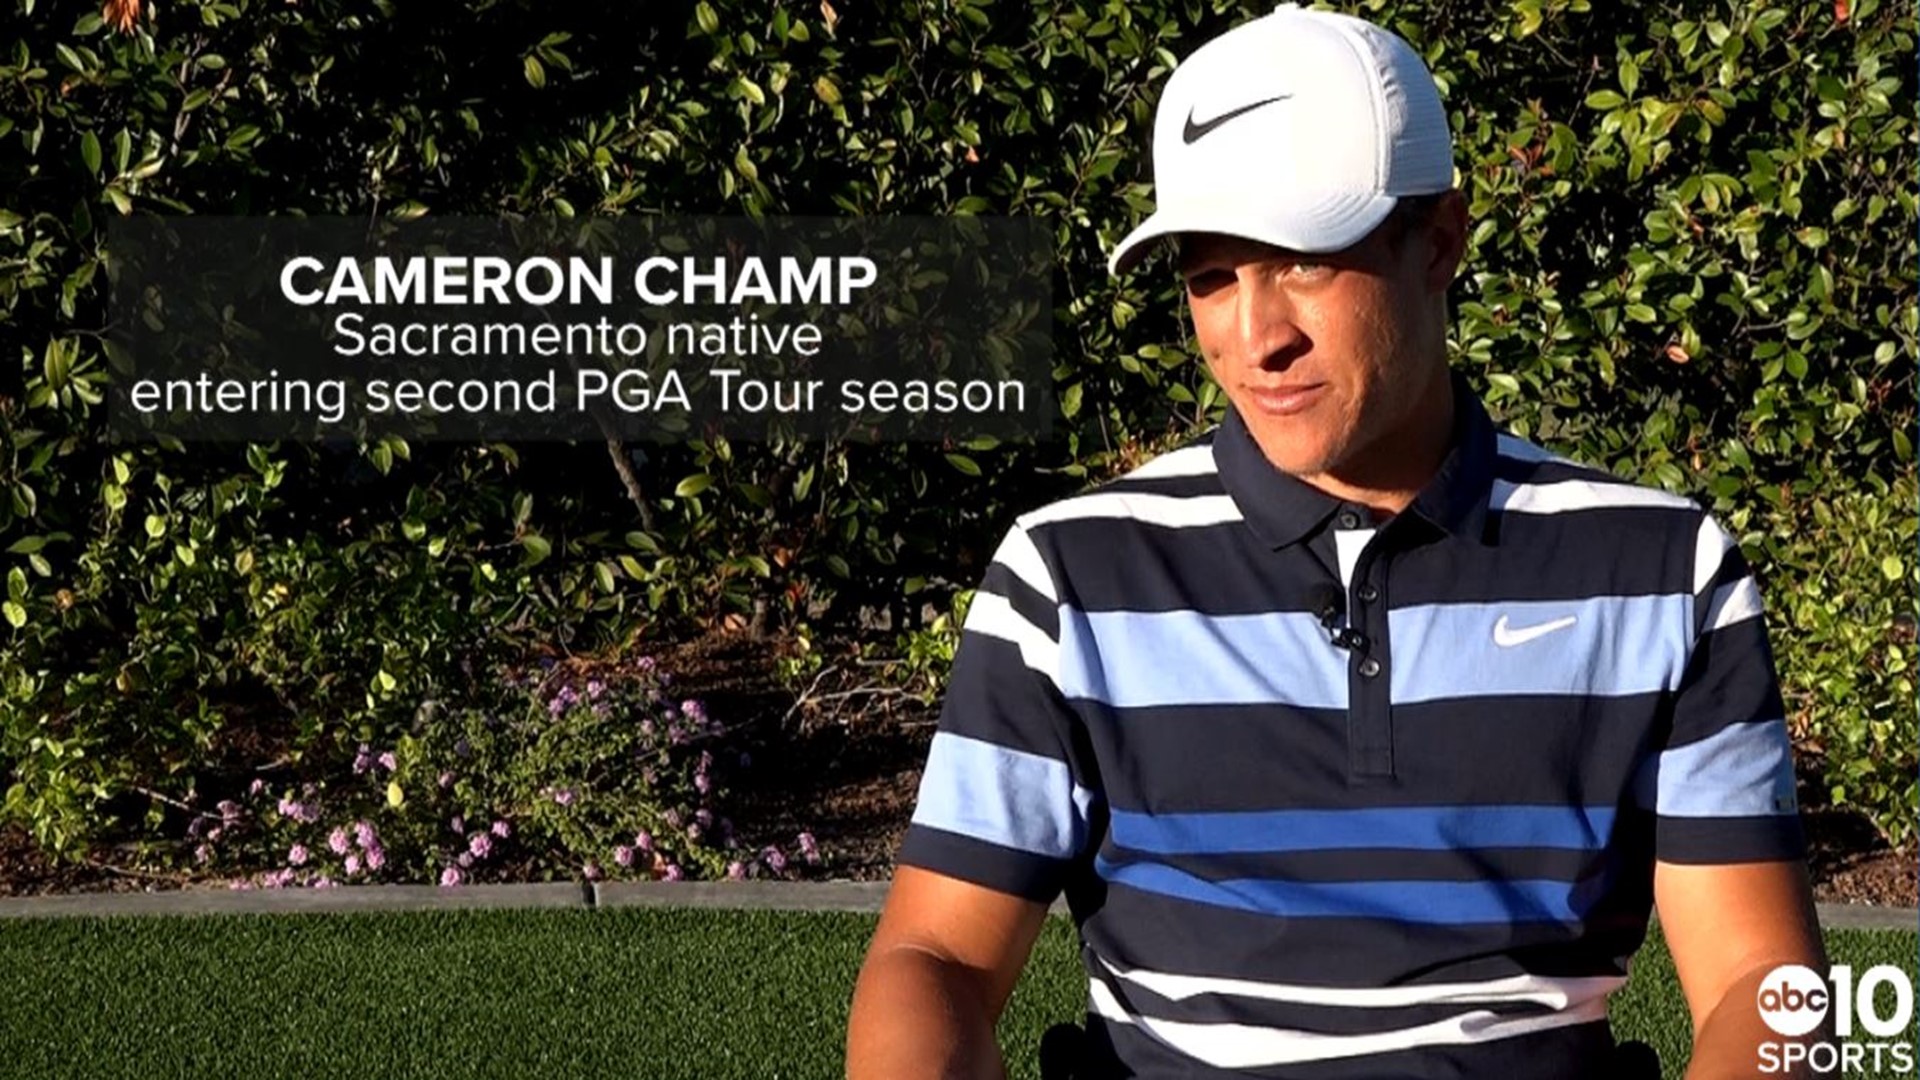 Sacramento's Cameron Champ reflects on his first year on the PGA Tour and discusses the goals he has for the his sophomore season on the professional golf circuit.